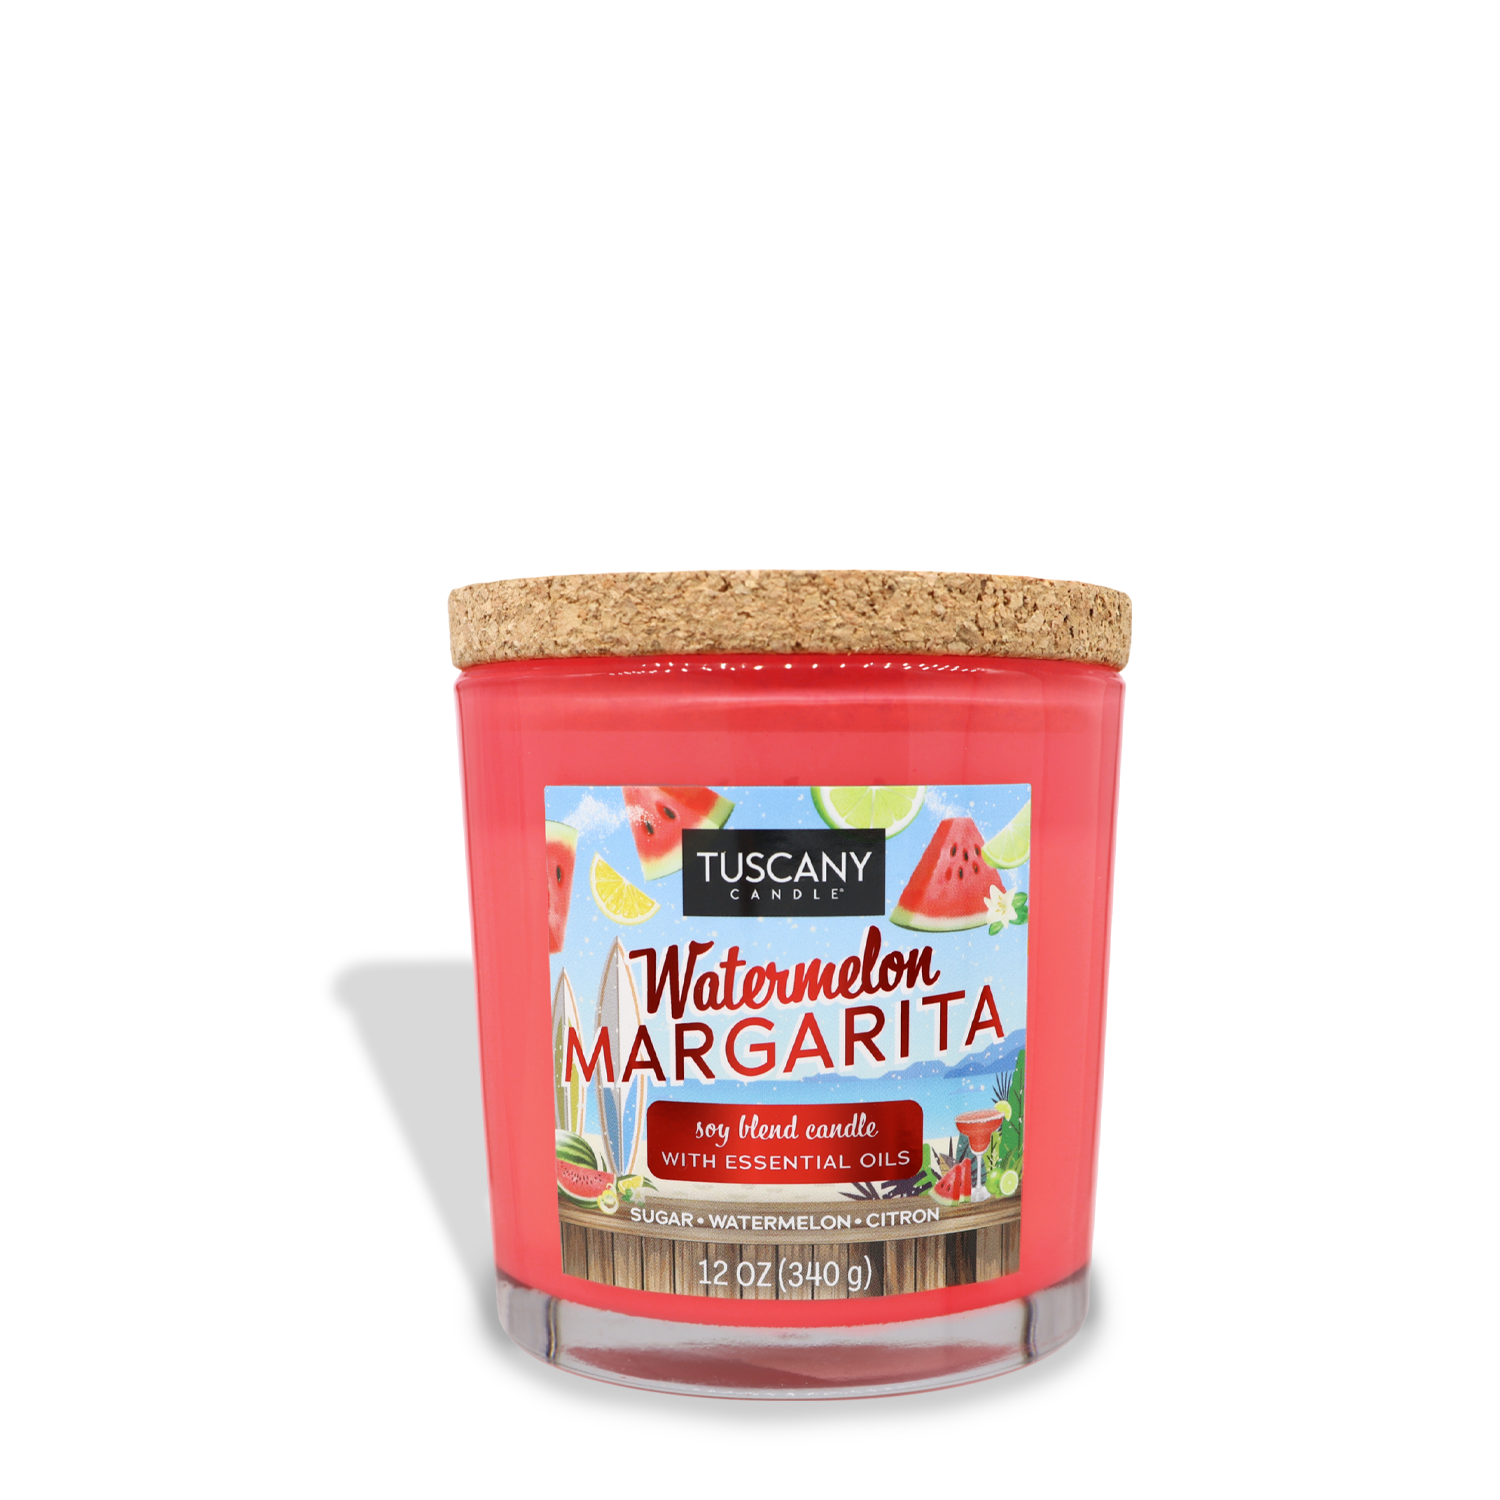 A red Tuscany Candle® SEASONAL labeled "Watermelon Margarita (12 oz) – Sunset Beach Bar Collection" with a cork lid. The text on the label mentions it is a soy blend scented candle with essential oils, weighing 12 oz (340.9 g).